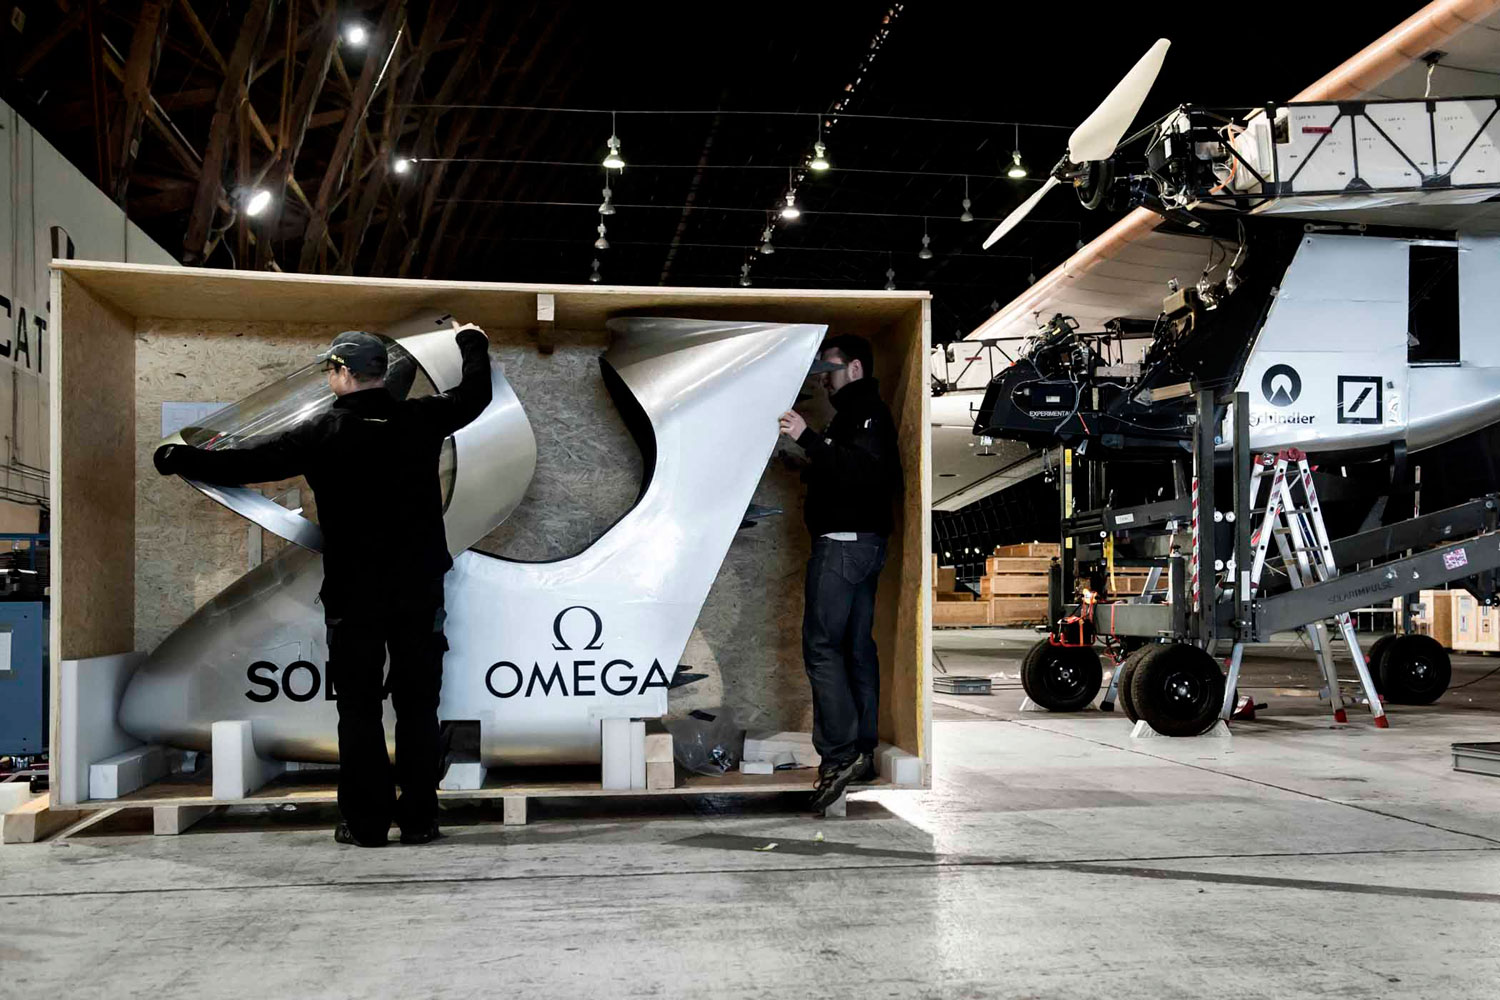 Solar Impulse's HB-SIA prototype is being reassembled after arriving from Switzerland on board a Boeing 747 cargo plane.